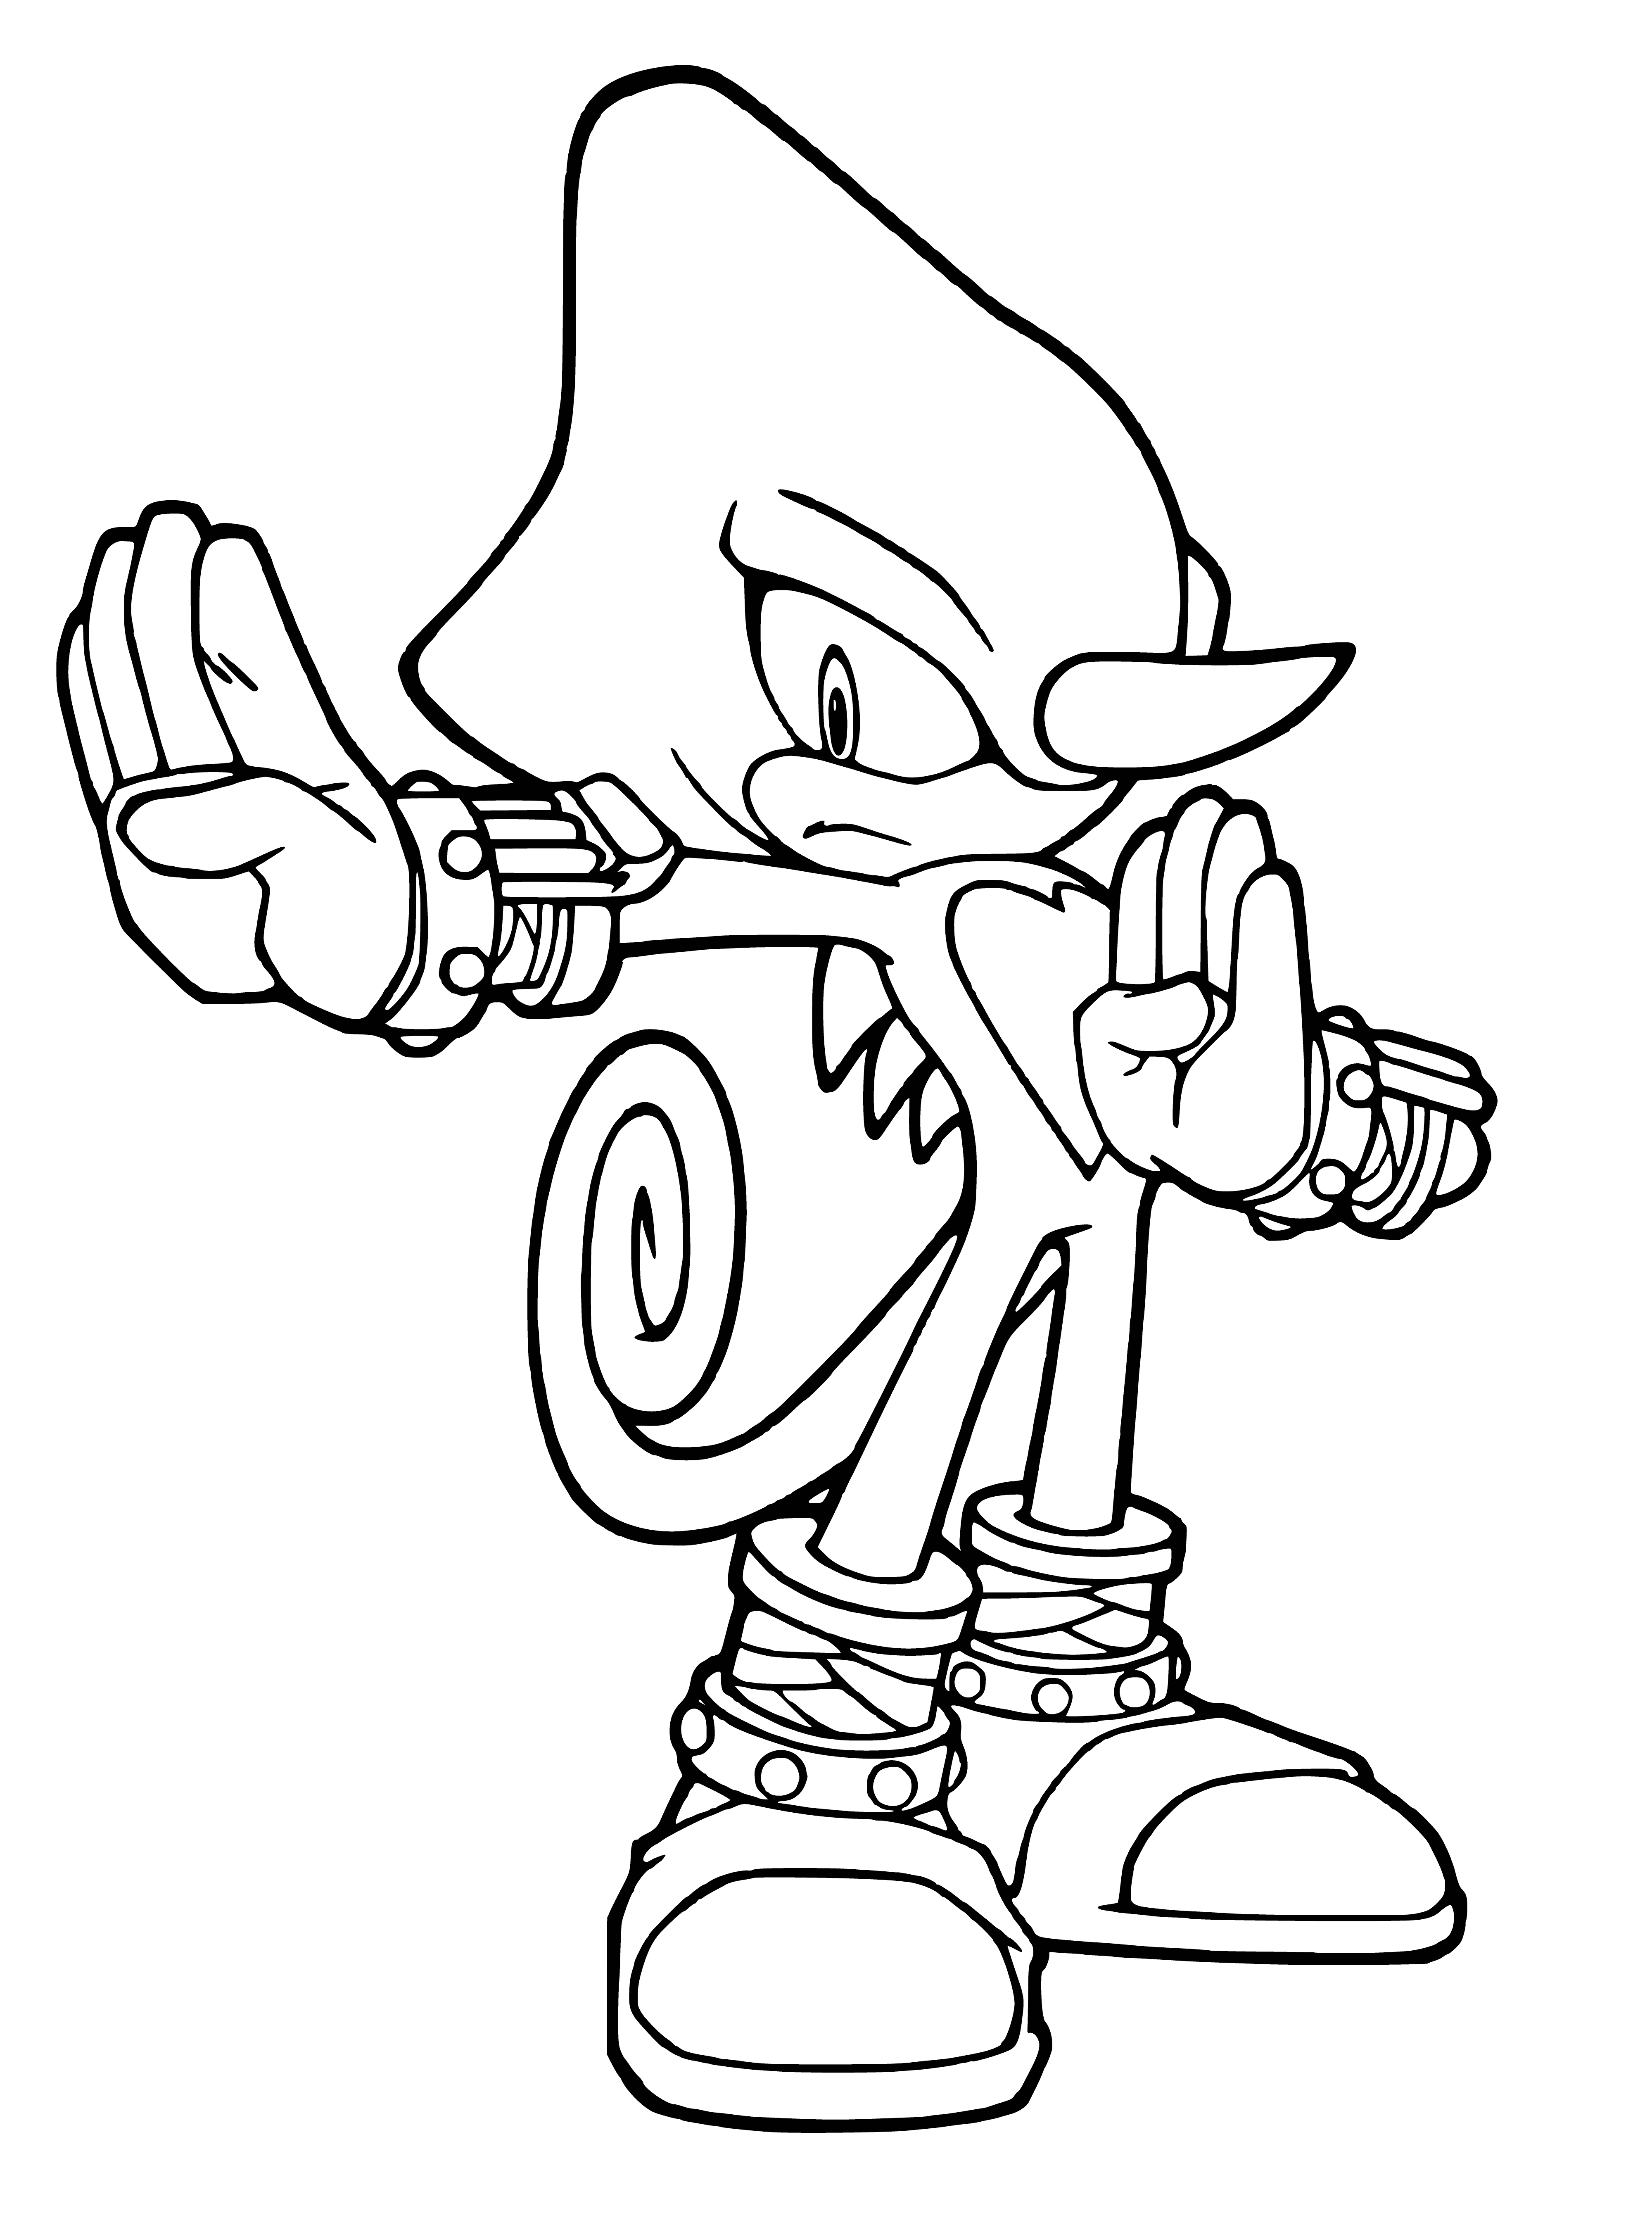 coloring page: Espio, a chameleon on Team Sonic, is serious and competitive. A skilled fighter, he uses stealthy attacks.